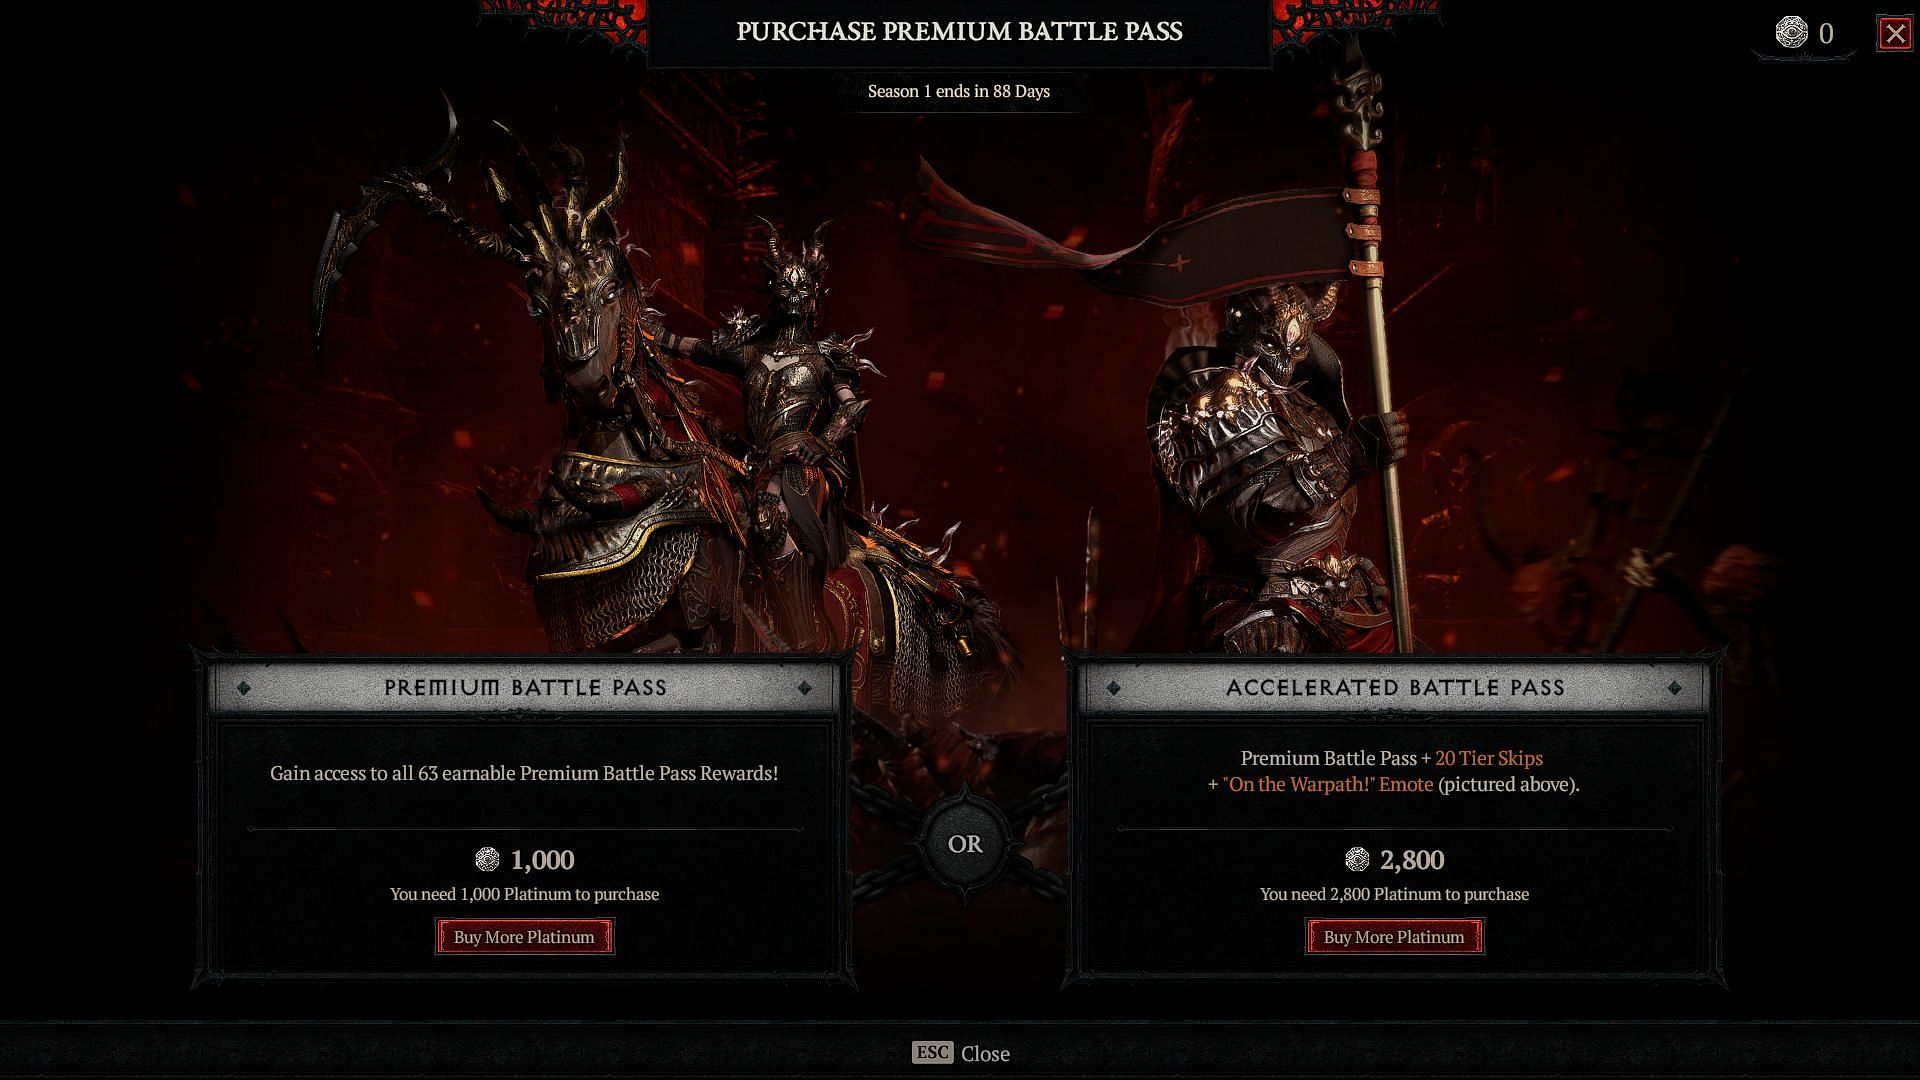 There are two types of Premium Battle Passes in Diablo 4 (Image via Blizzard Entertainment)